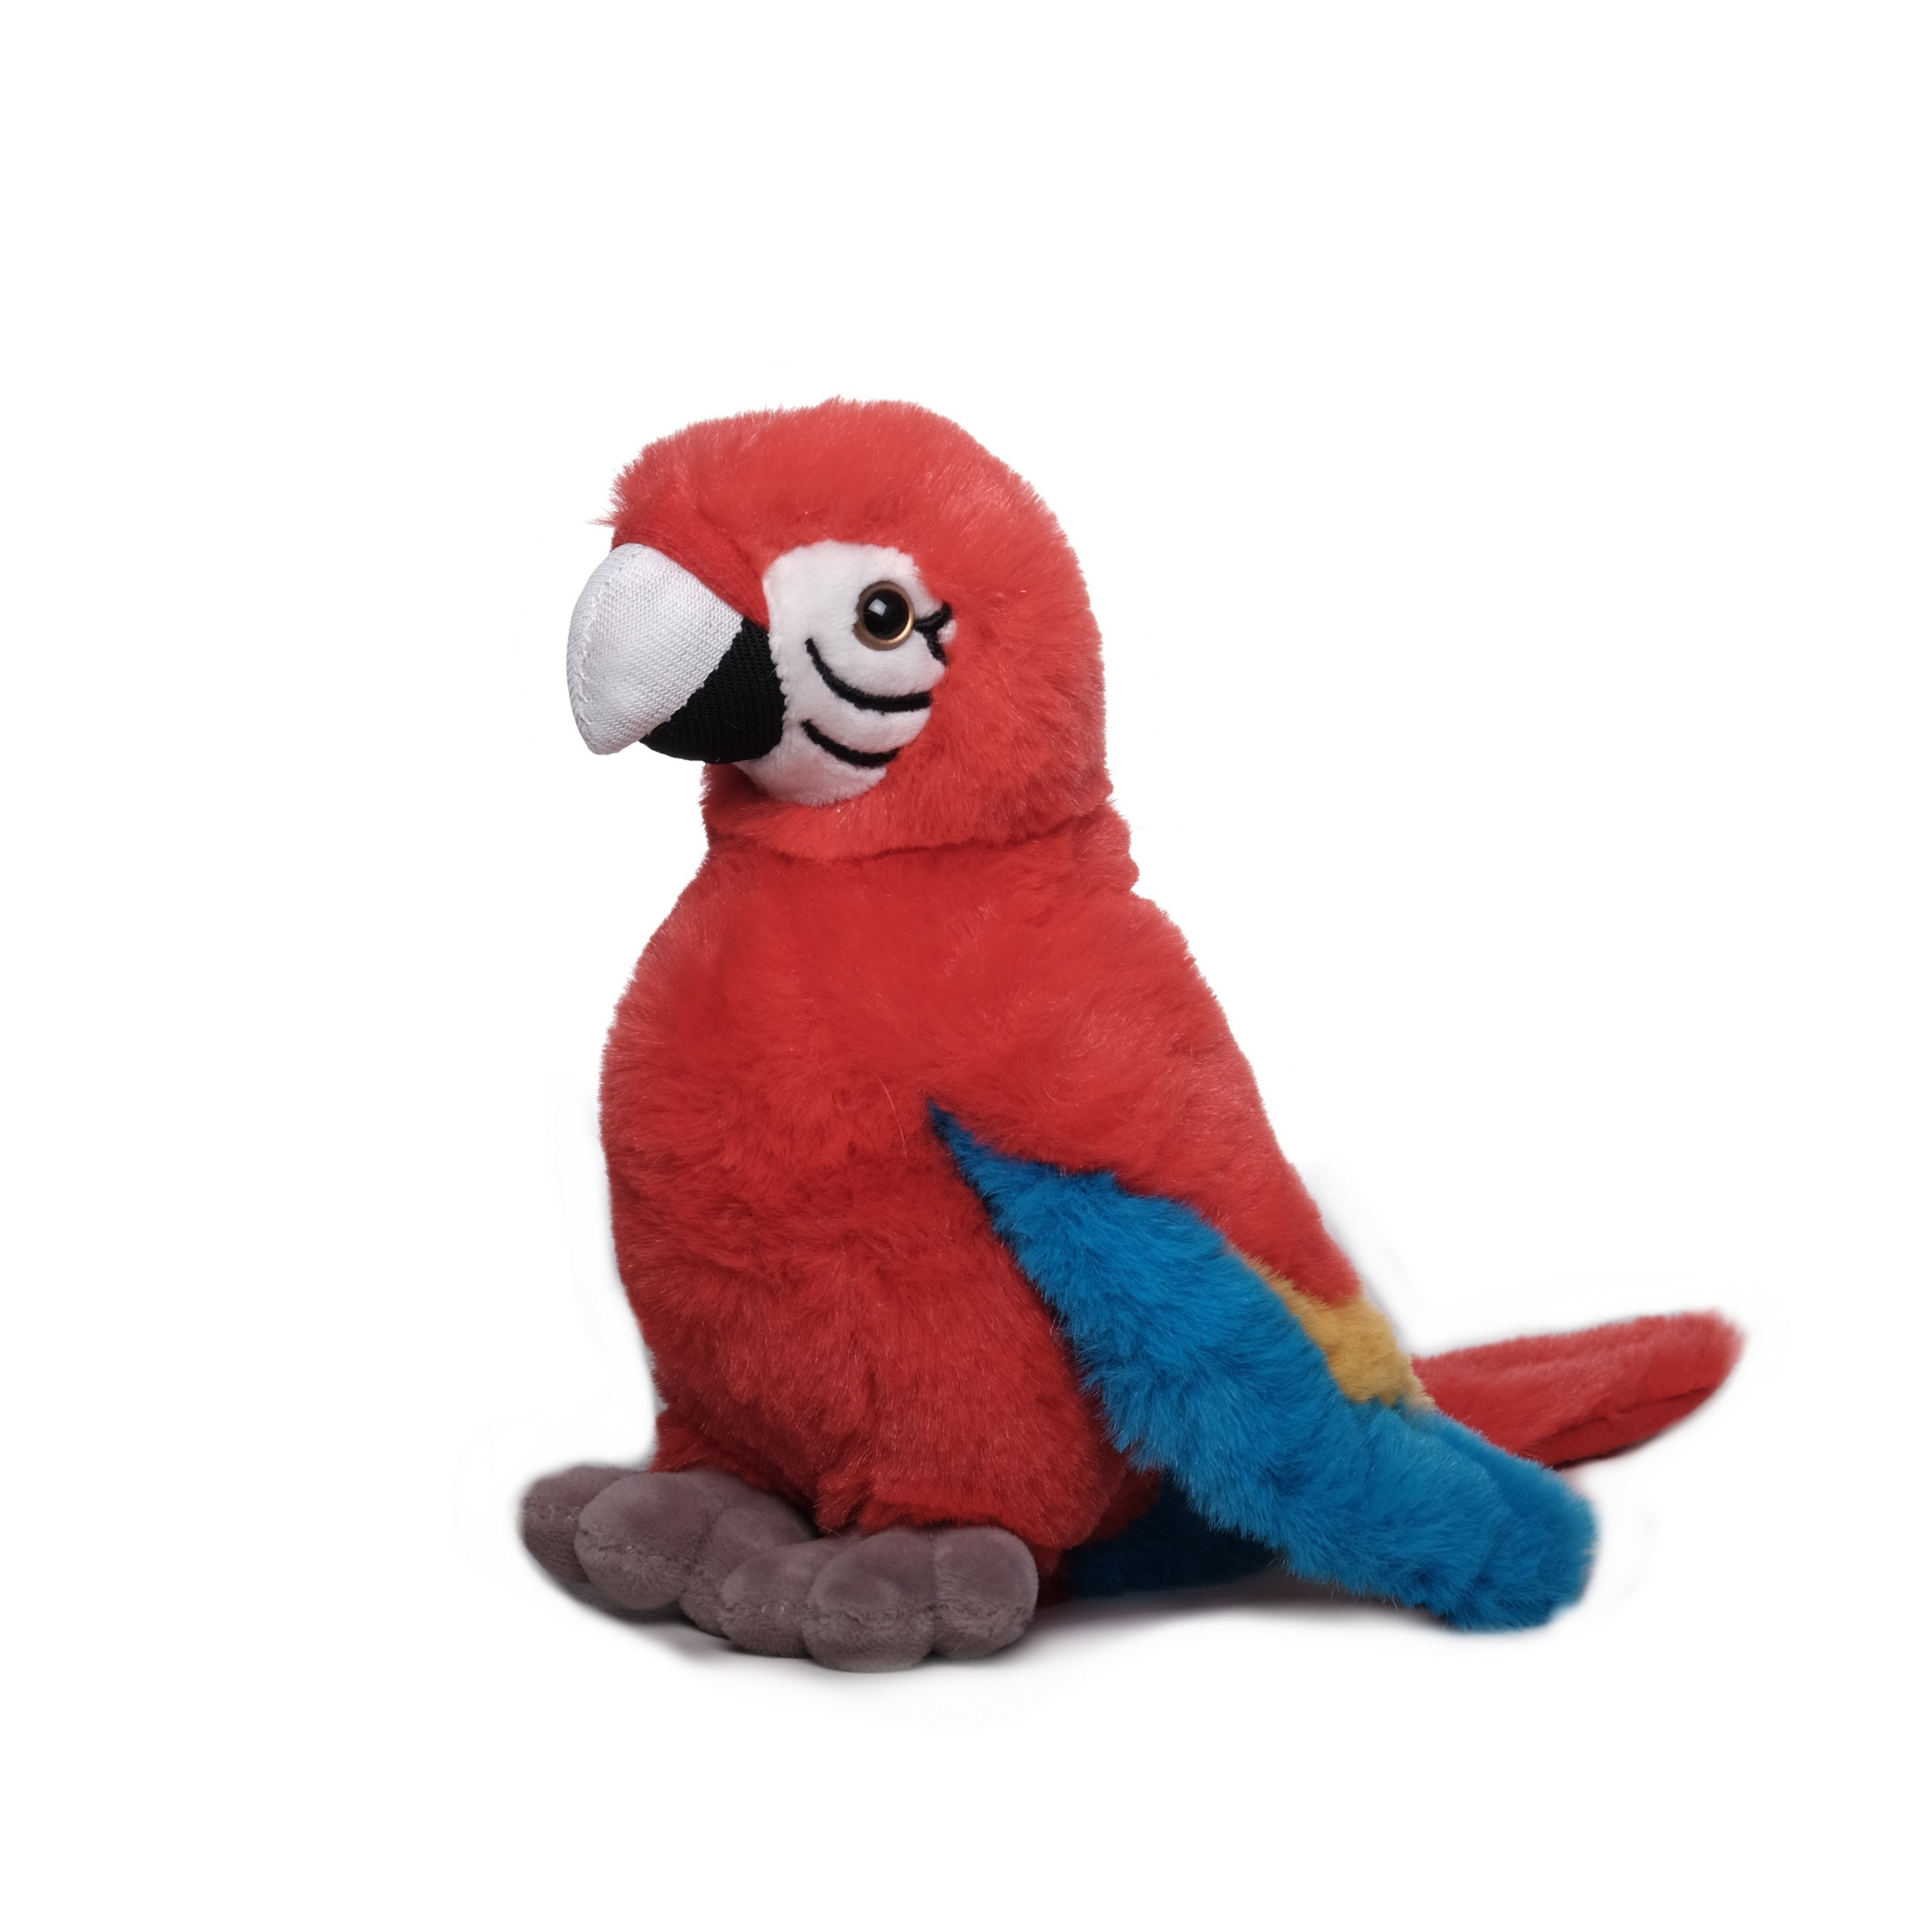 Inware Pluche papegaai vogel knuffel rood-blauw polyester 20 cm